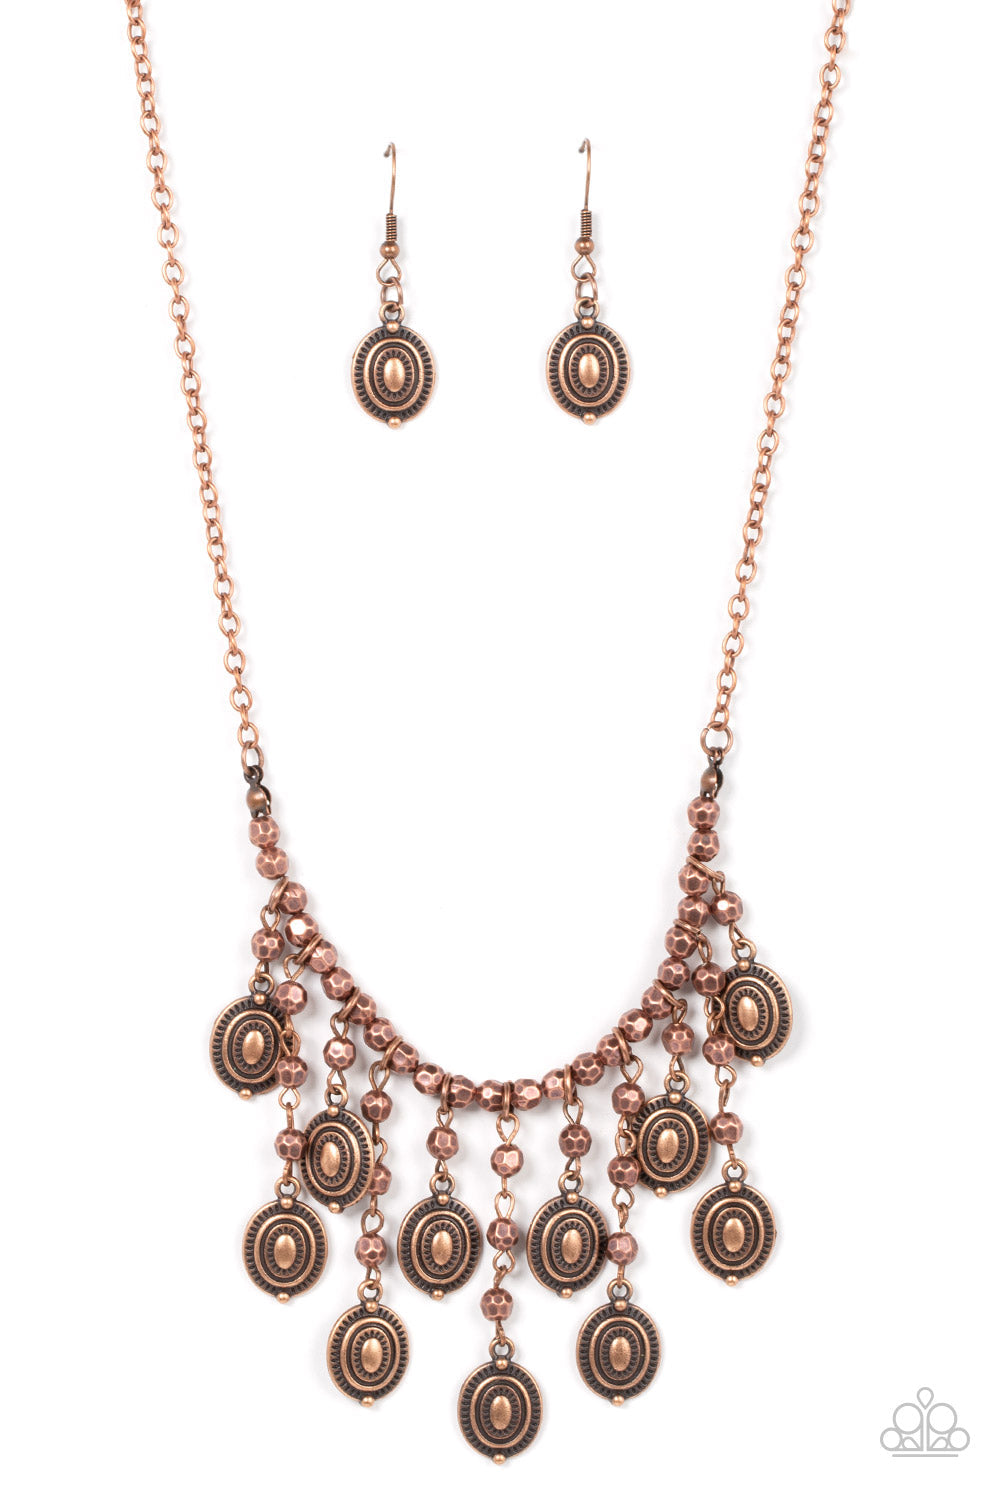 Leave it in the PASTURE - Copper Necklace - Paparazzi Accessories - Attached to an antiqued copper chain, a strand of faceted copper beads are threaded along an invisible wire below the collar. The gritty beads give way to a copper beaded tassel featuring textured copper frames, resulting in a rustic fringe below the collar.